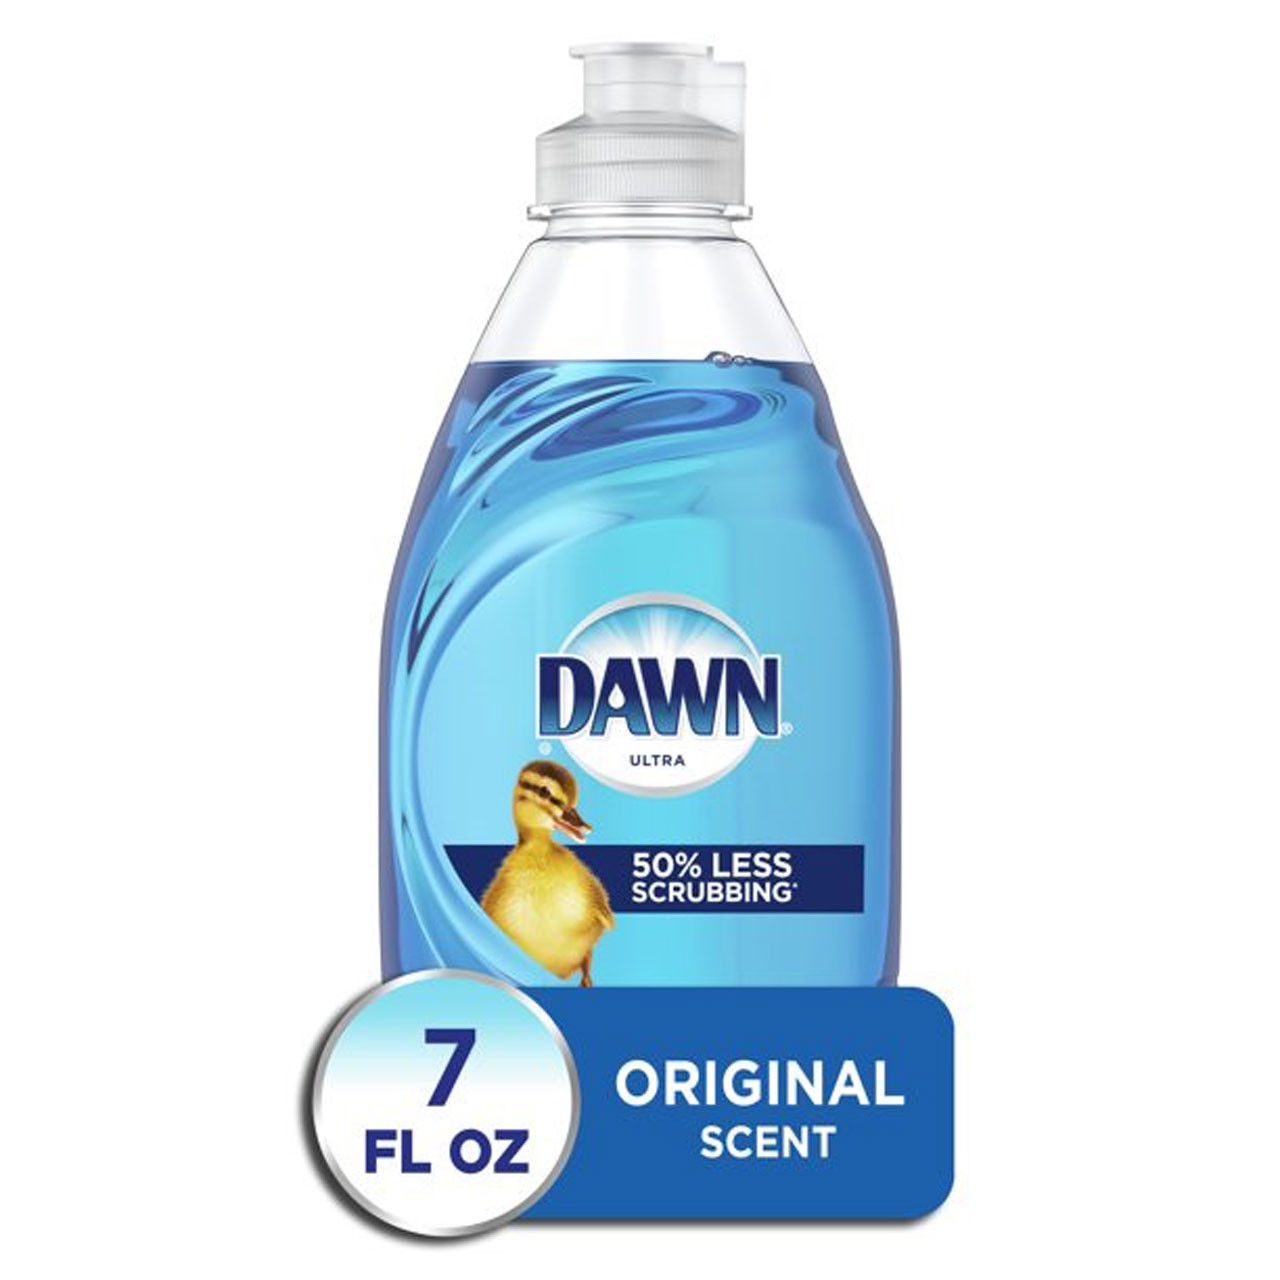 What are the ideal uses for small 7oz bottles of Dawn Liquid Dishwashing Detergent?